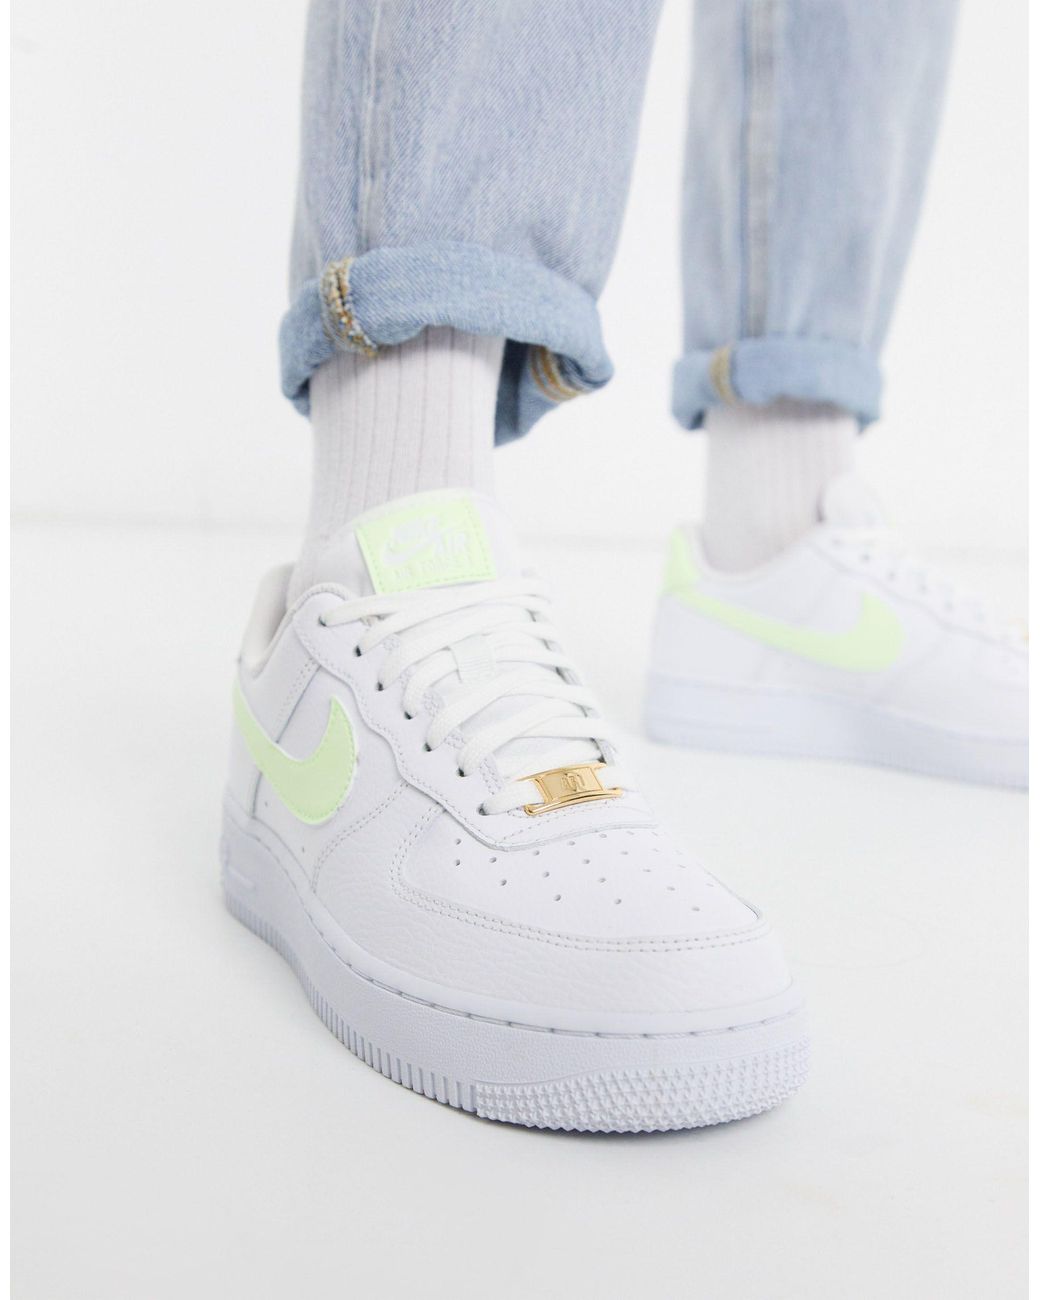 Nike Rubber Air Force 1 '07 White And Fluro Green Sneakers | Lyst UK